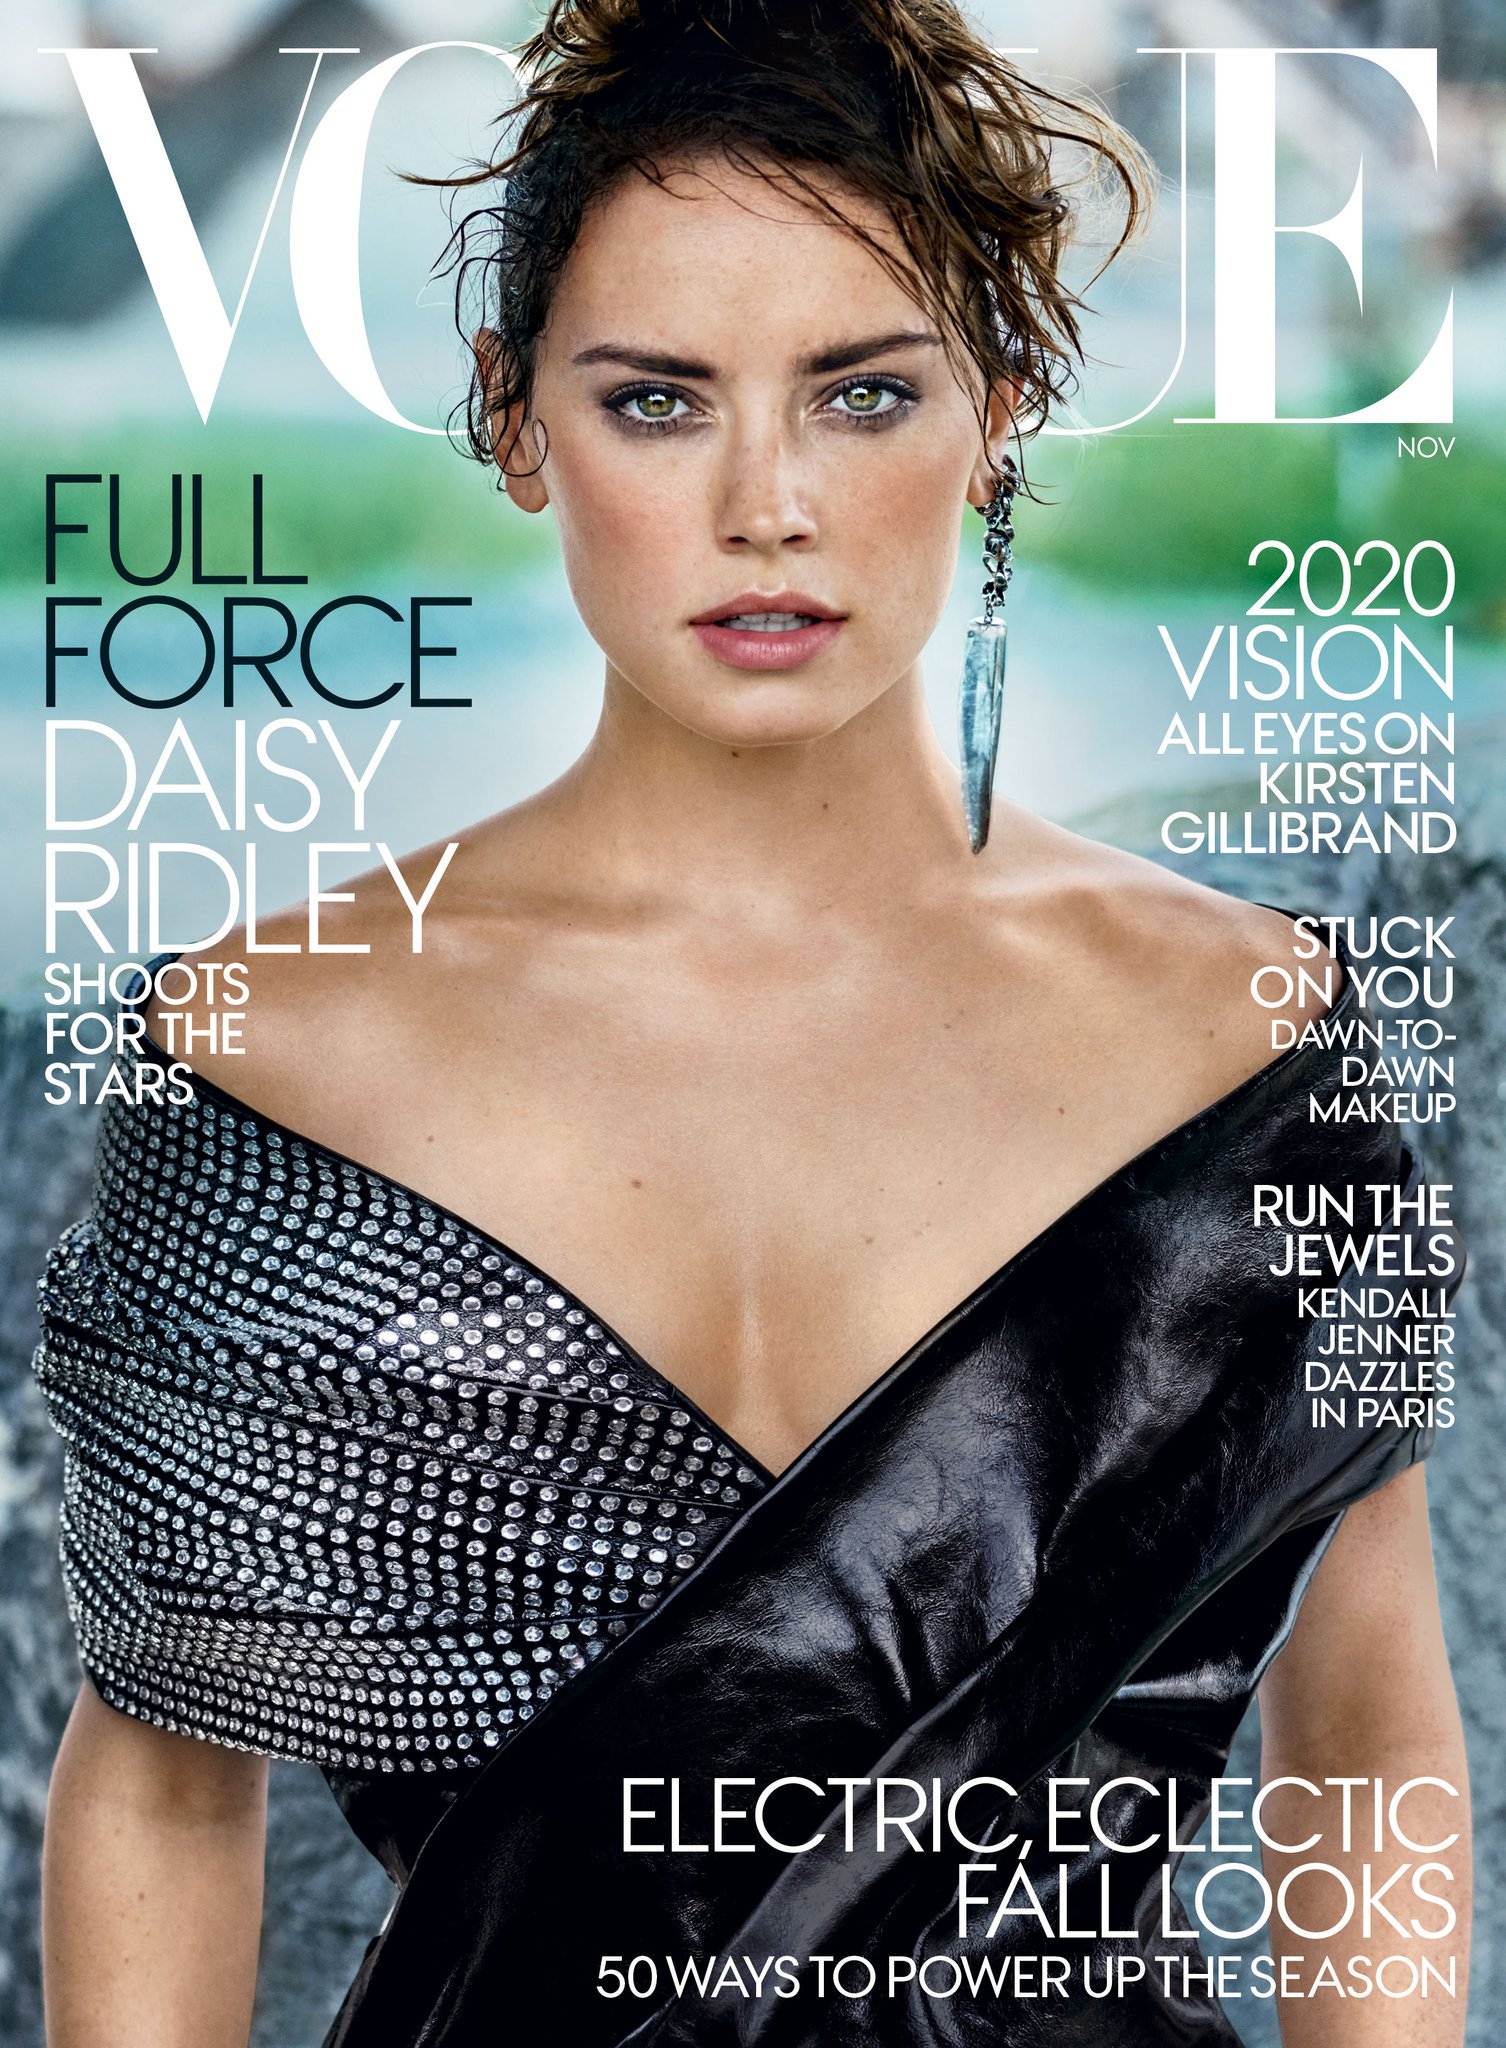 Star Wars The Last Jedi Actress Daisy Ridley Covers Vogue Teases